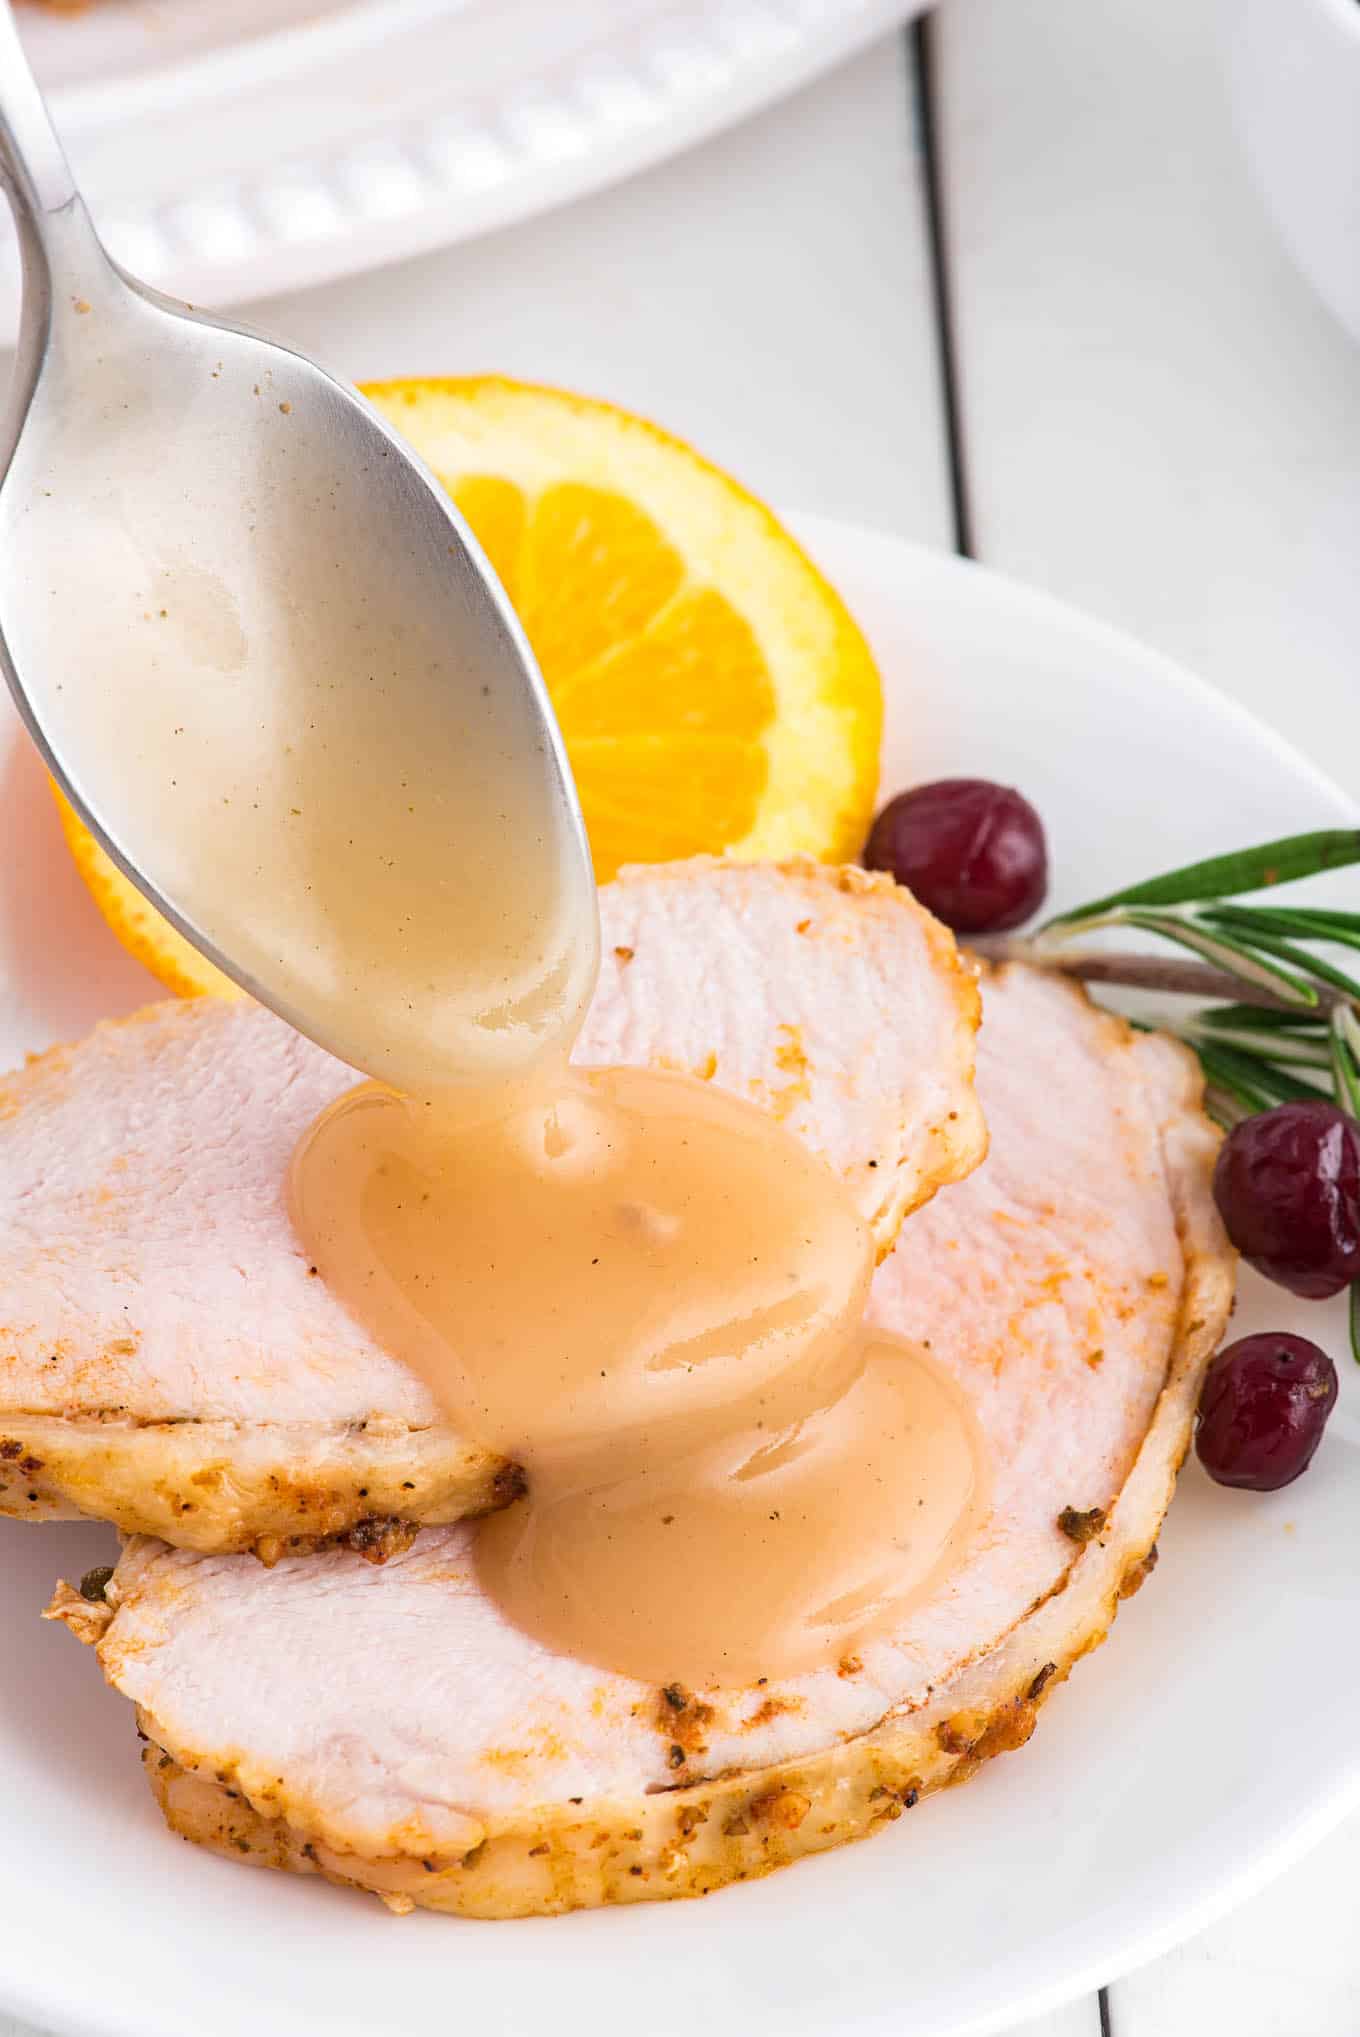 Spooning turkey gravy over two slices of roasted turkey breast sliced on a plate.